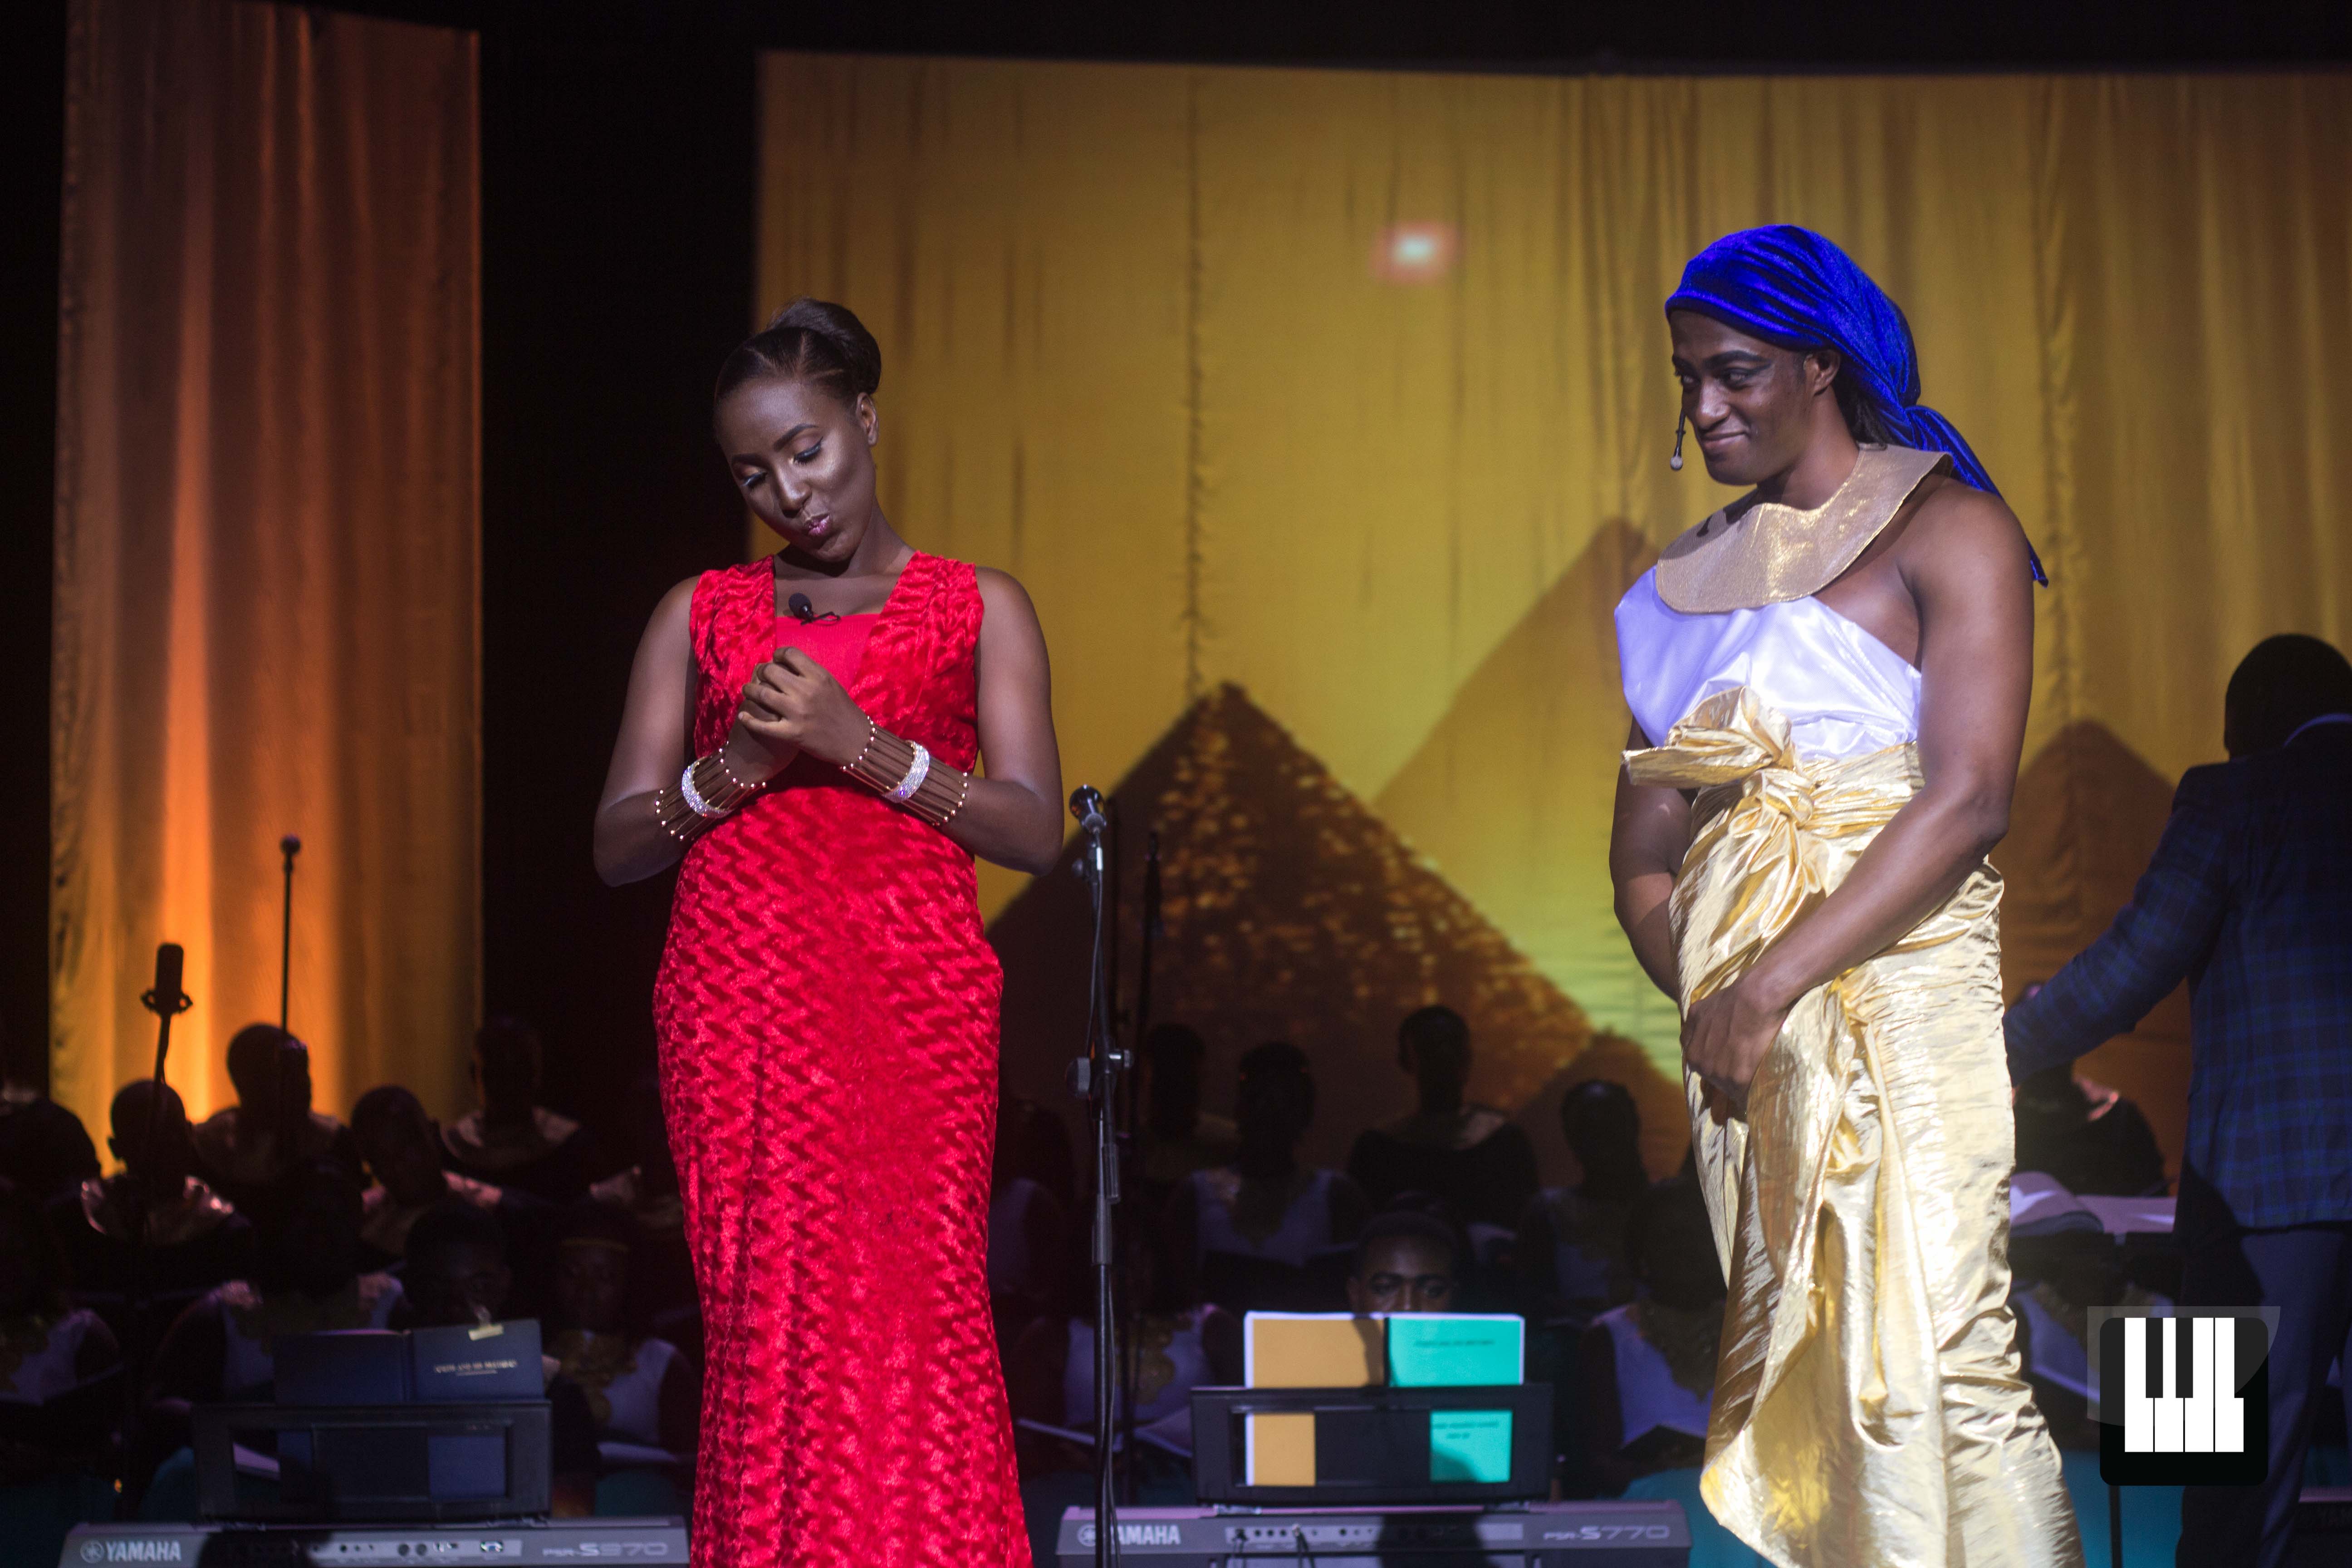 Joseph and His Brethren James Varrick Armaah led Harmonious Chorale in a historic performance of Handel's Joseph and his Brethren in Accra. Choral Music Ghana takes a look at the performance and what it means for Ghanaian music.